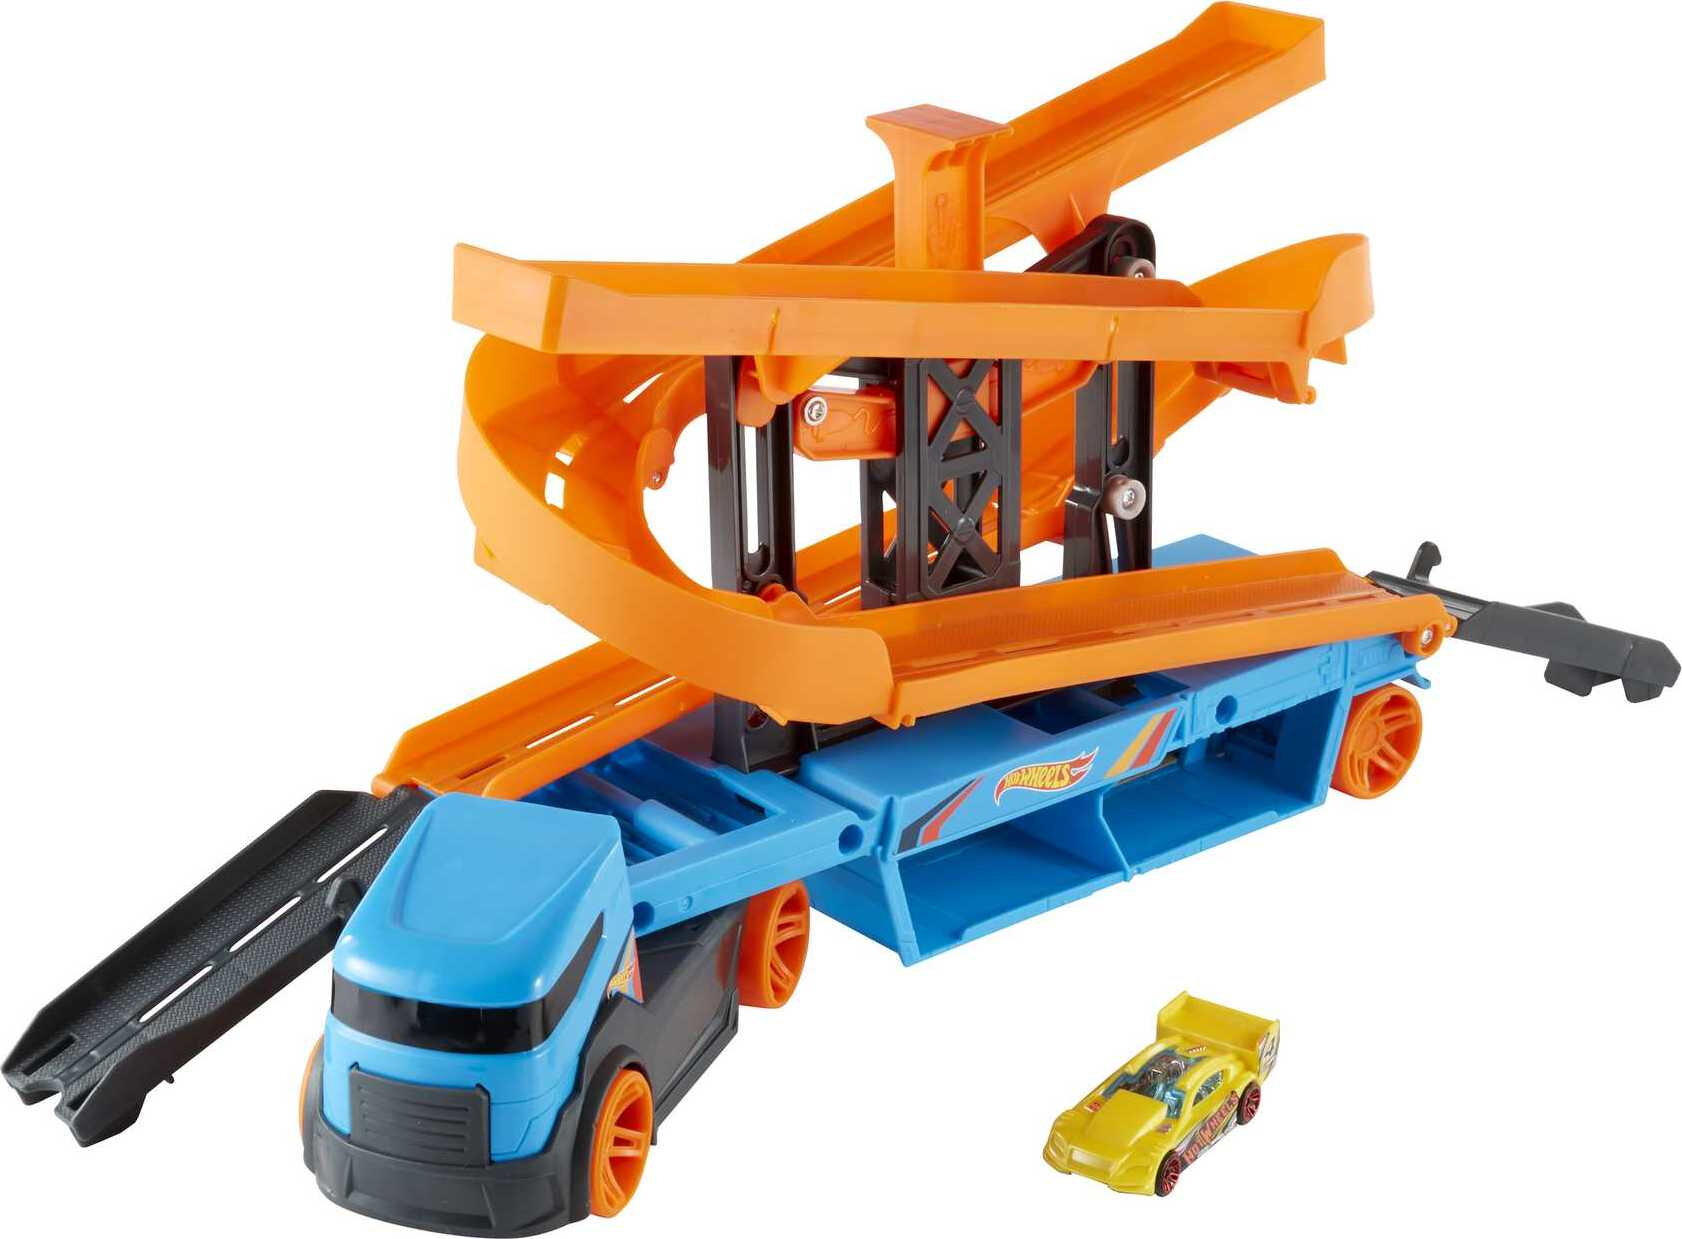 Hot Wheels City Lift & Launch Hauler with 1:64 Scale Toy Car, Stores 20+ Vehicles - image 1 of 6